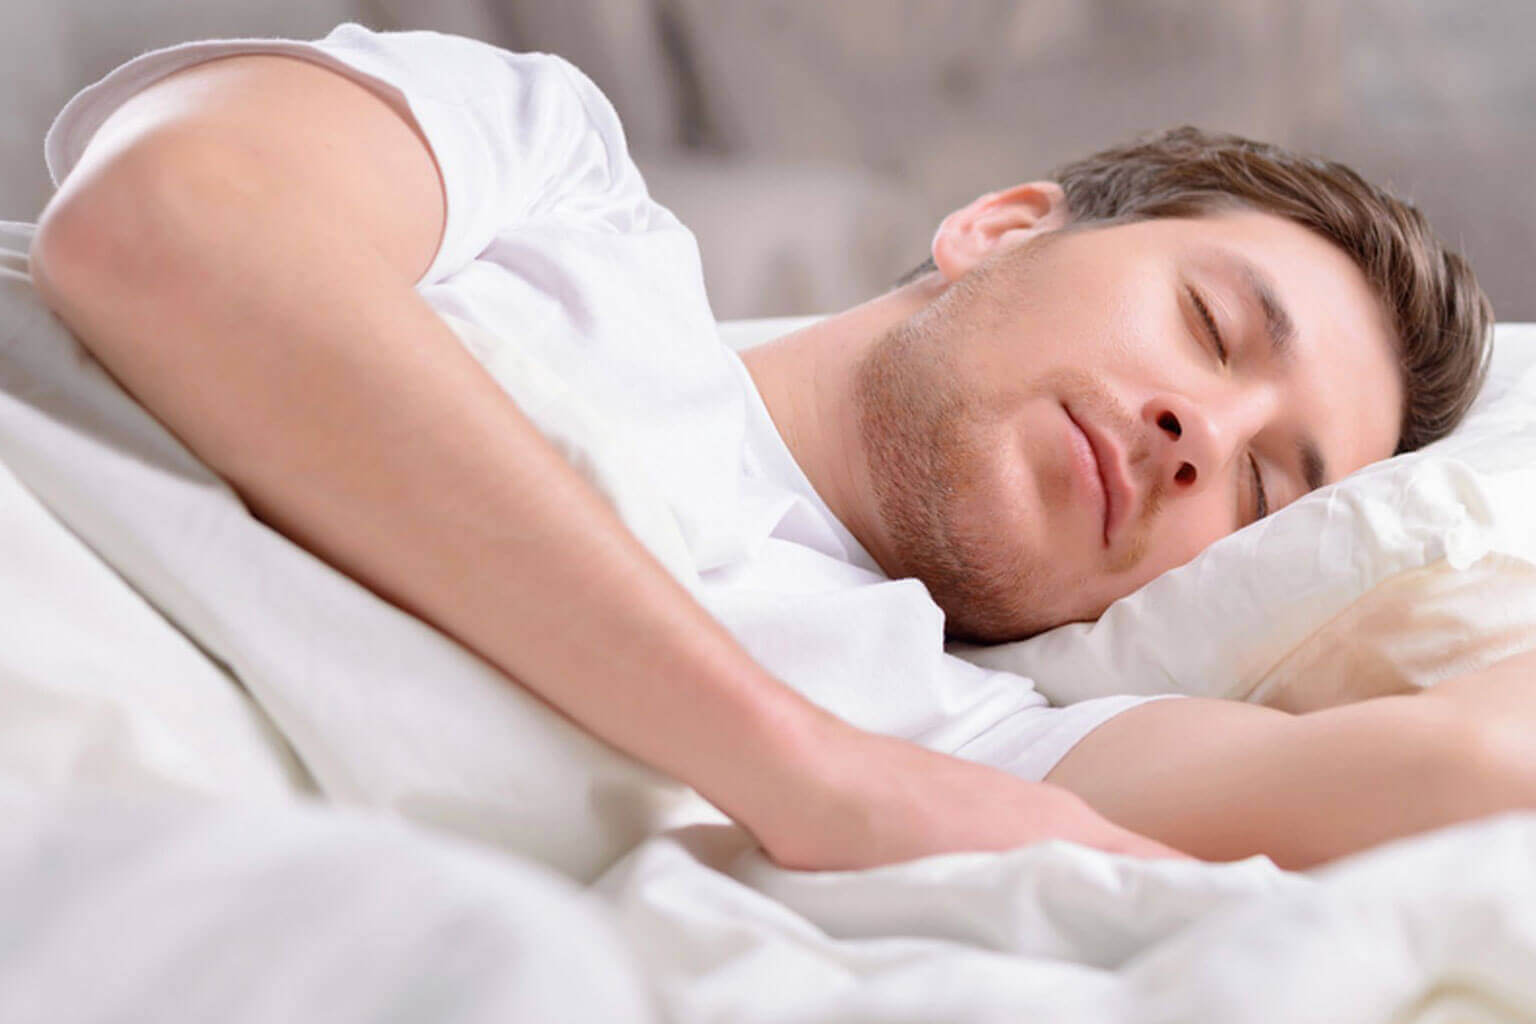 Sleep Your Way to Better Health for Few Steps